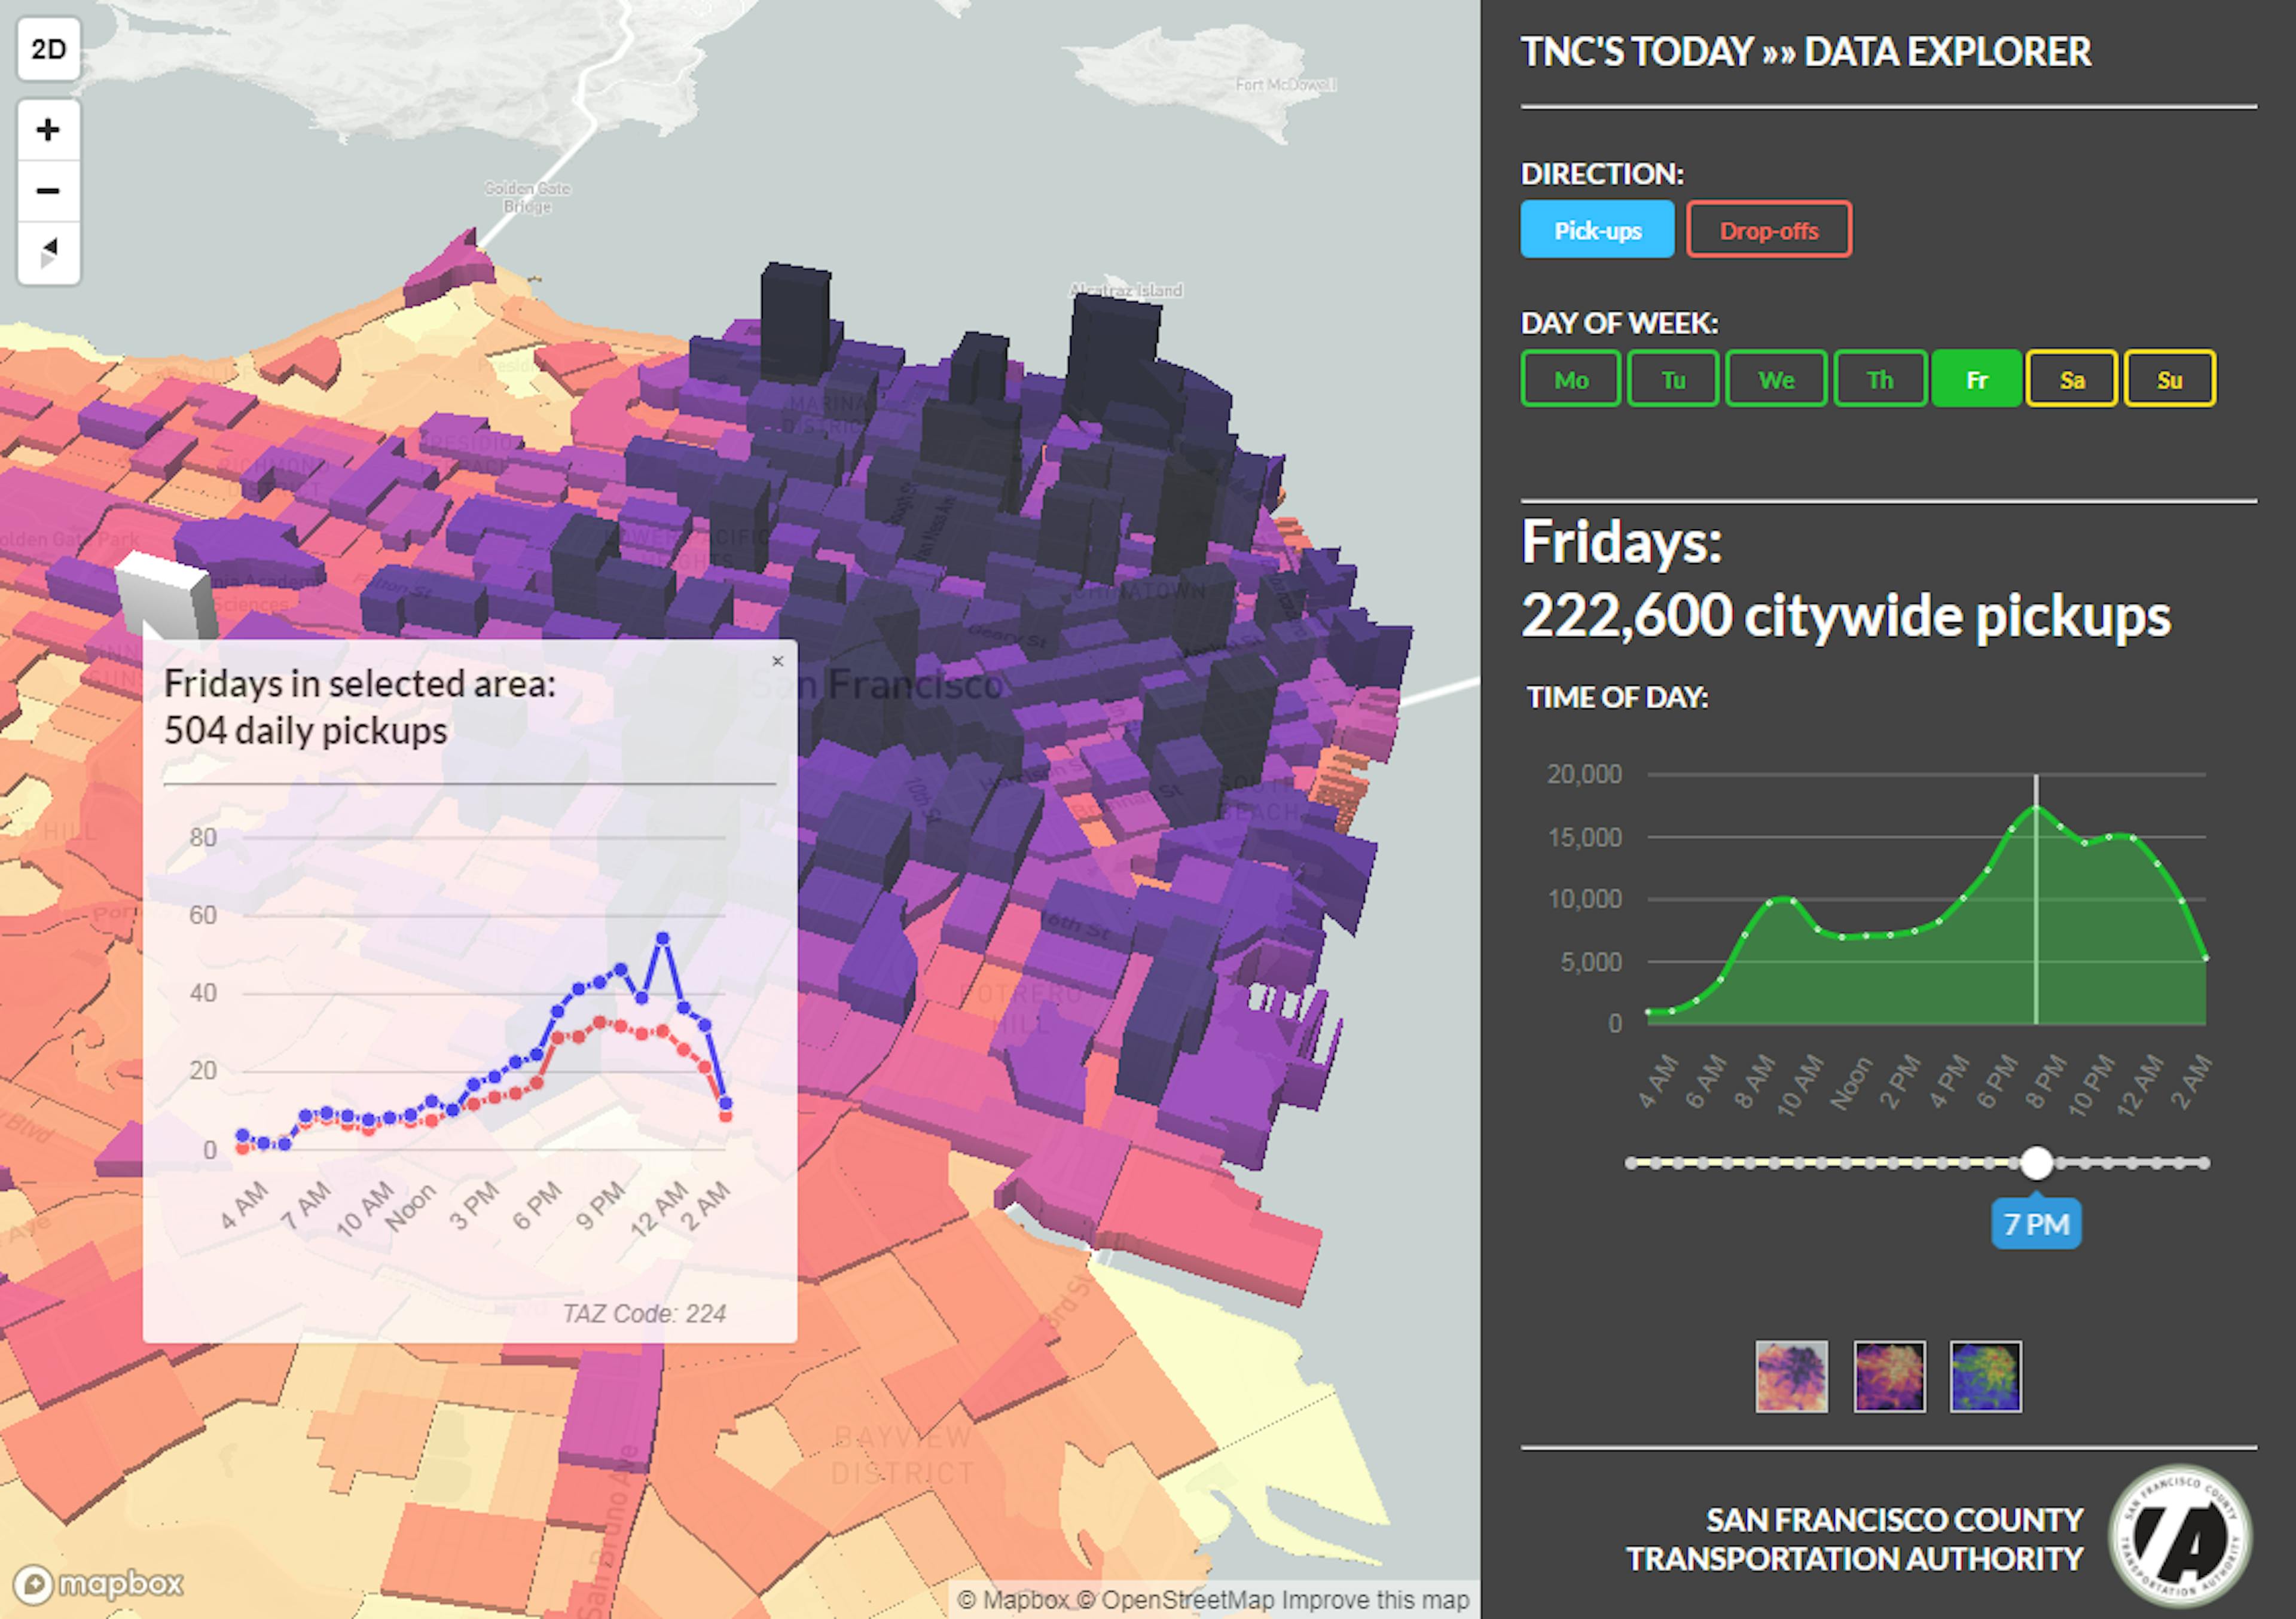 featured image - Visualizing Uber and Lyft usage in San Francisco: more than 200,000 trips a day.